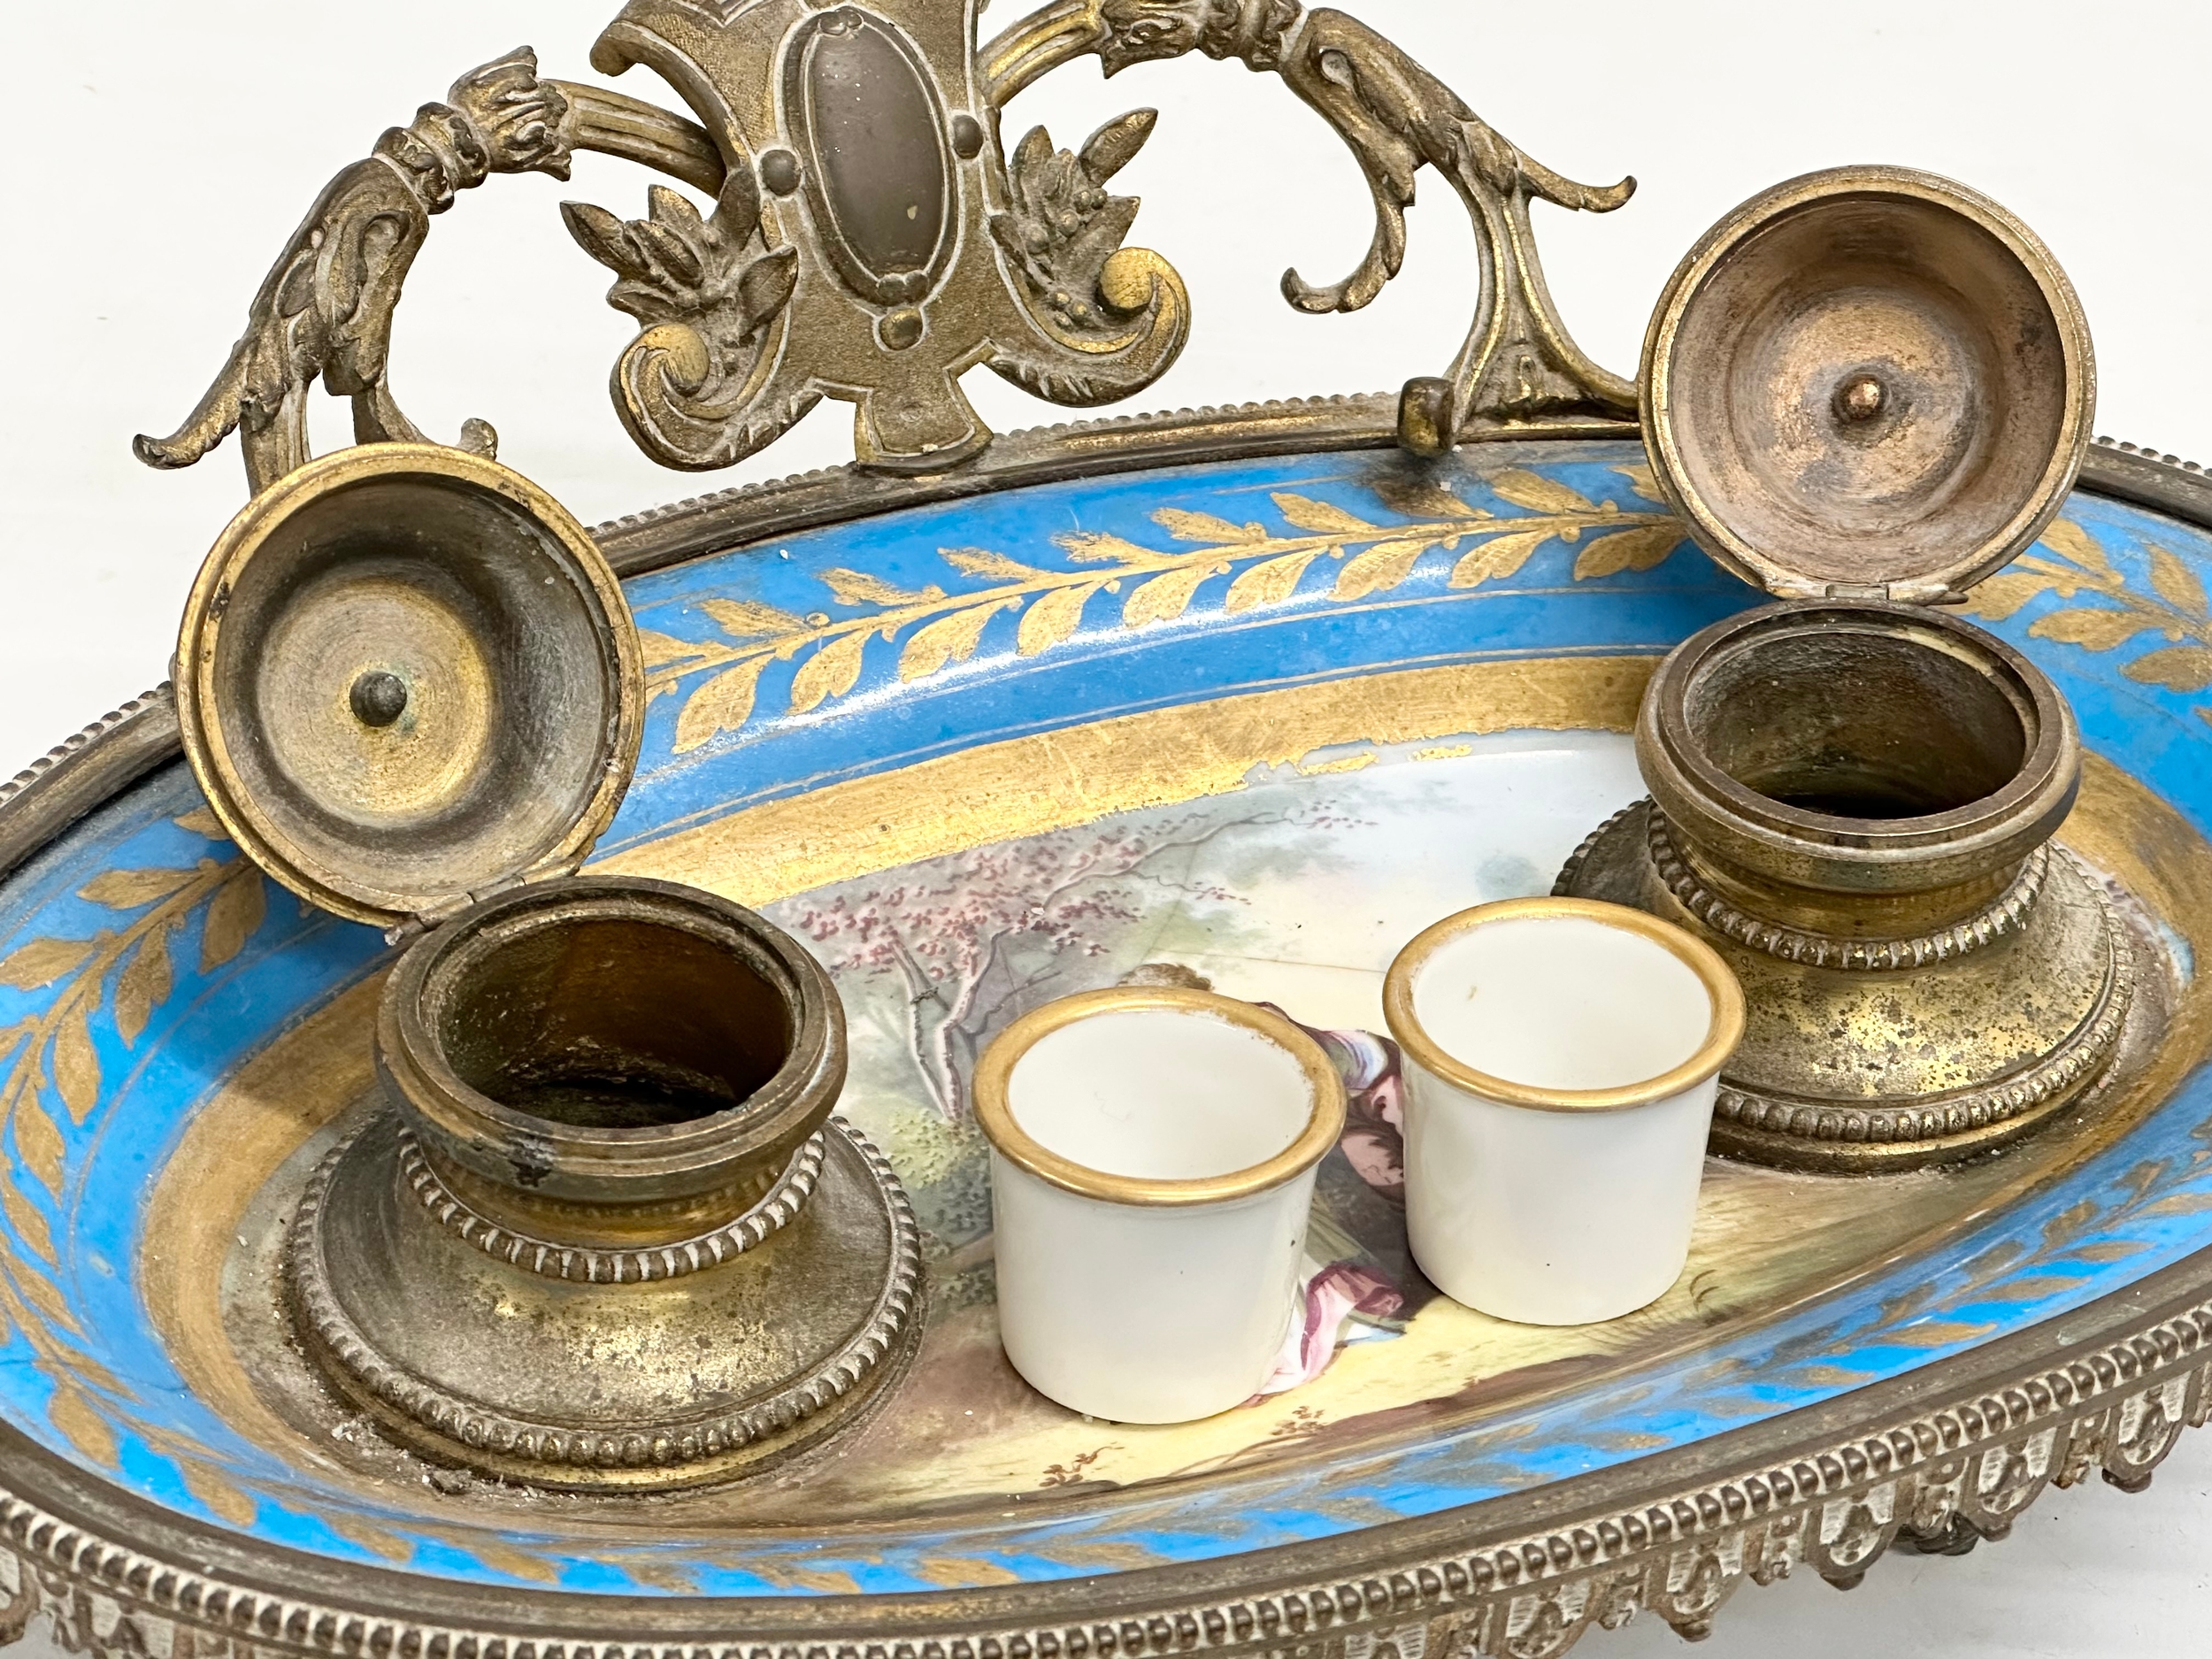 A late 19th century French ornate brass framed inkwell stand with hand painted porcelain bowl. - Image 6 of 12